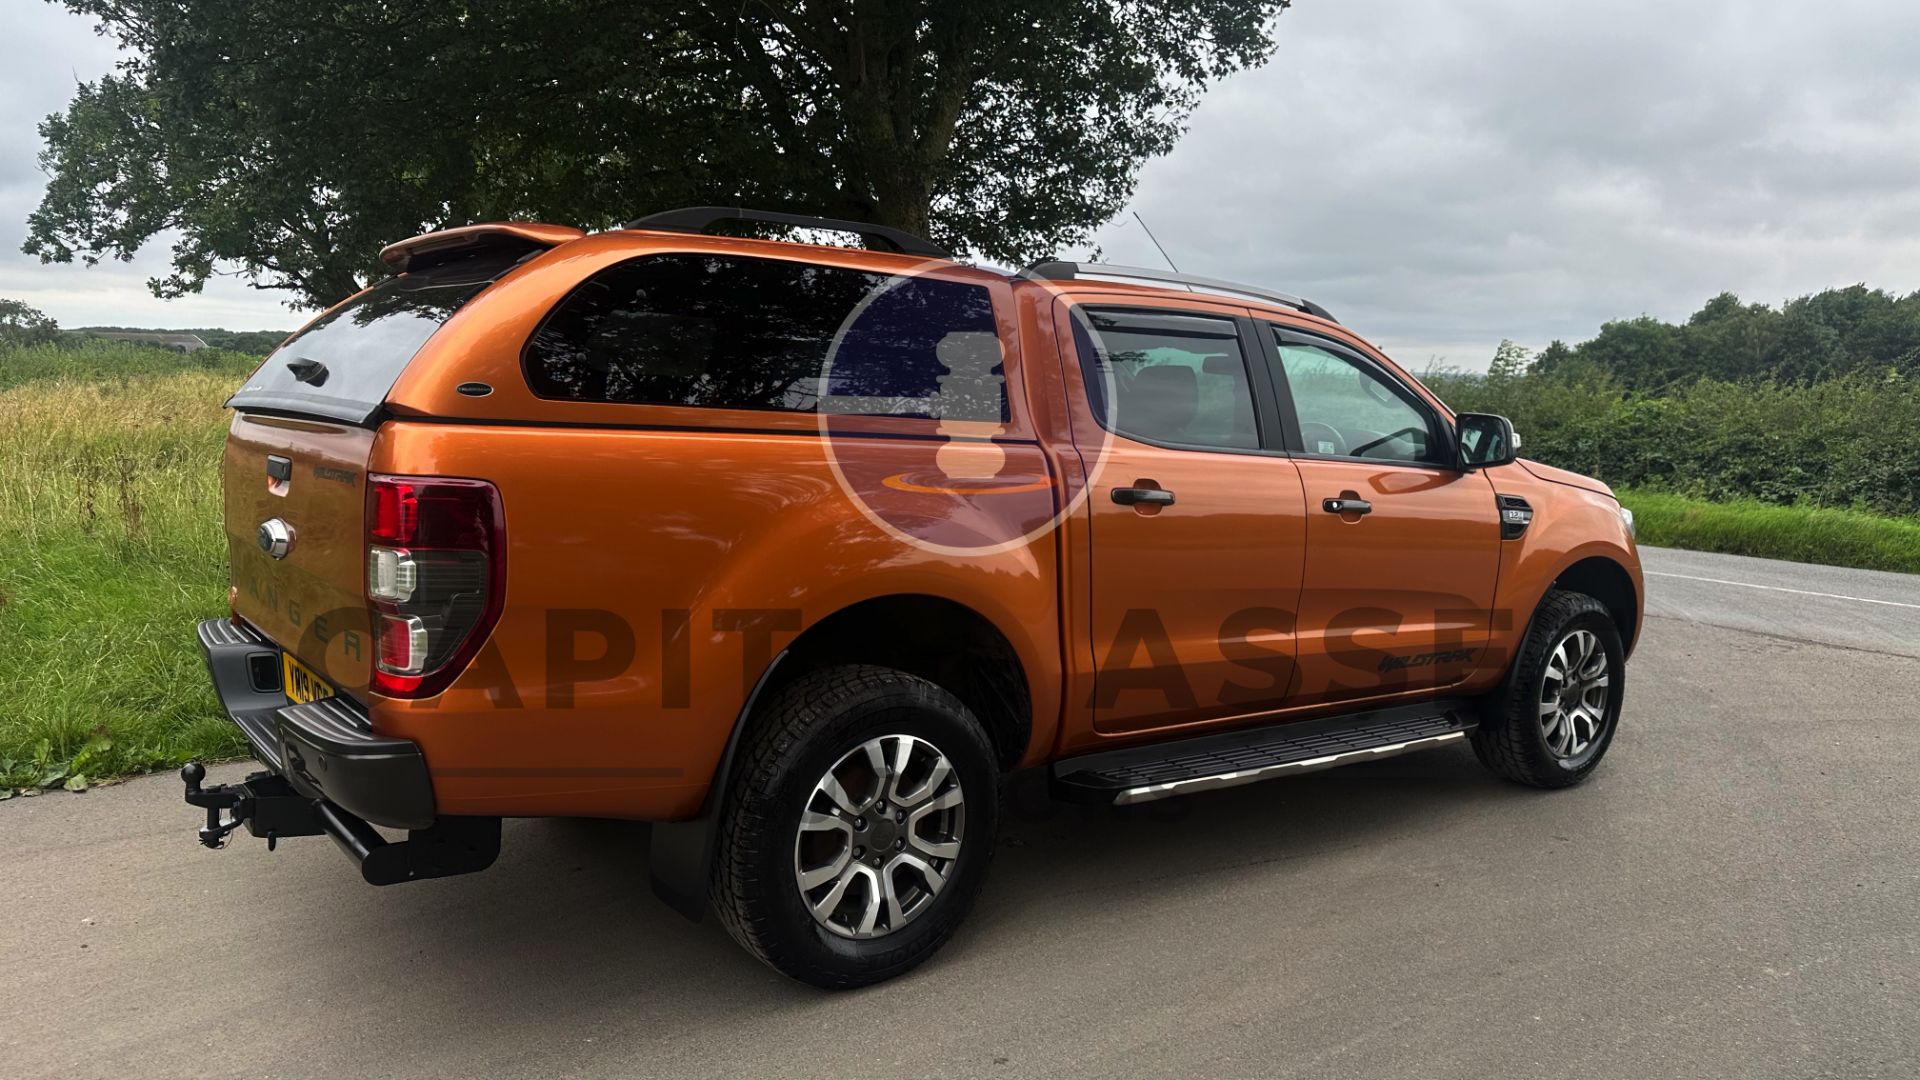 (ON SALE) FORD RANGER *WILDTRAK EDITION* DOUBLE CAB PICK-UP (2019 - EURO 6) 3.2 TDCI - AUTOMATIC - Image 13 of 53